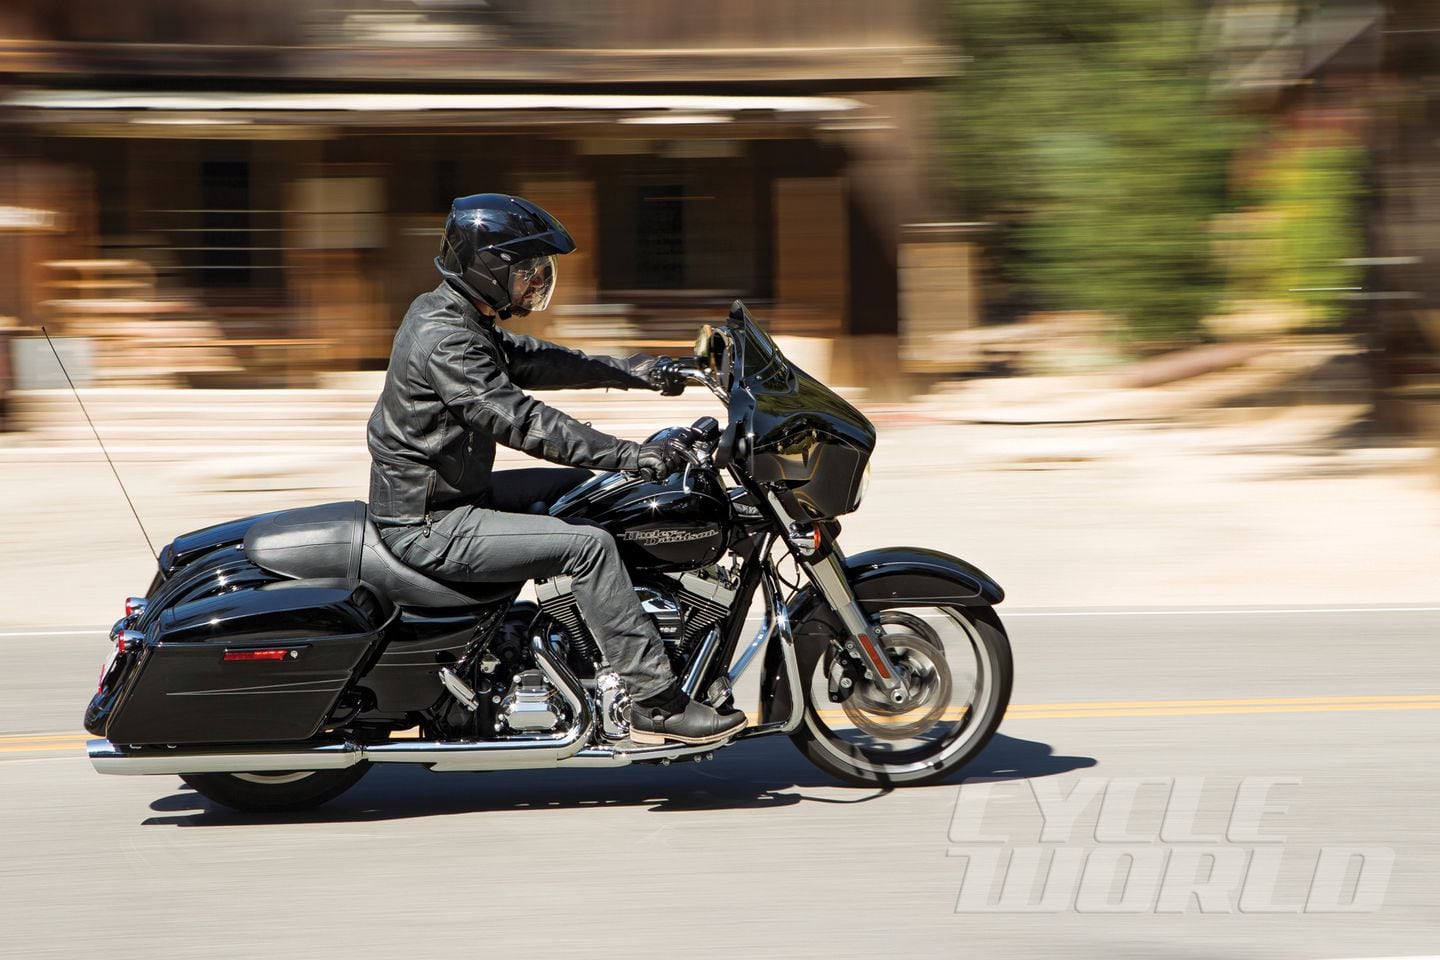 2014 Harley Davidson Street Glide Special Test Review Photos Specs Cycle World